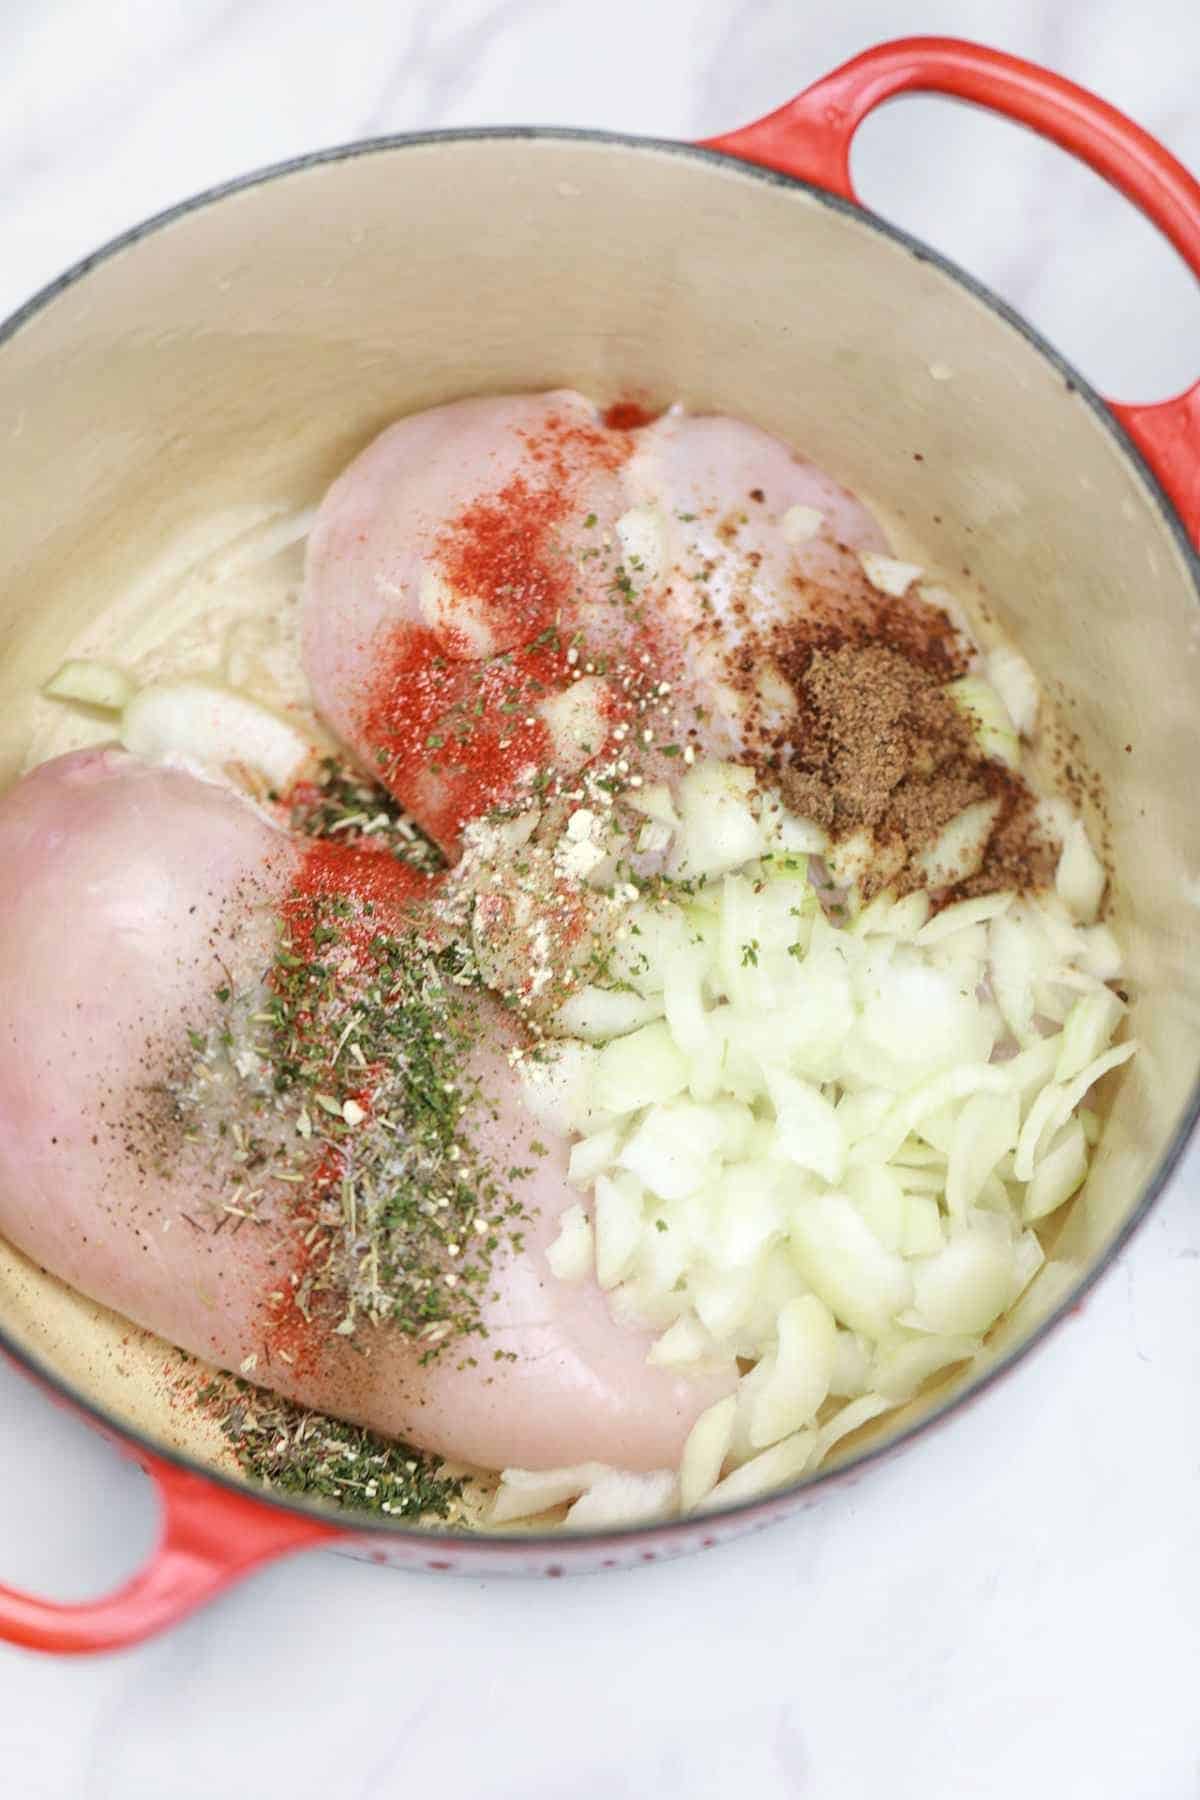 chicken, spices, and herbs in a red pot.